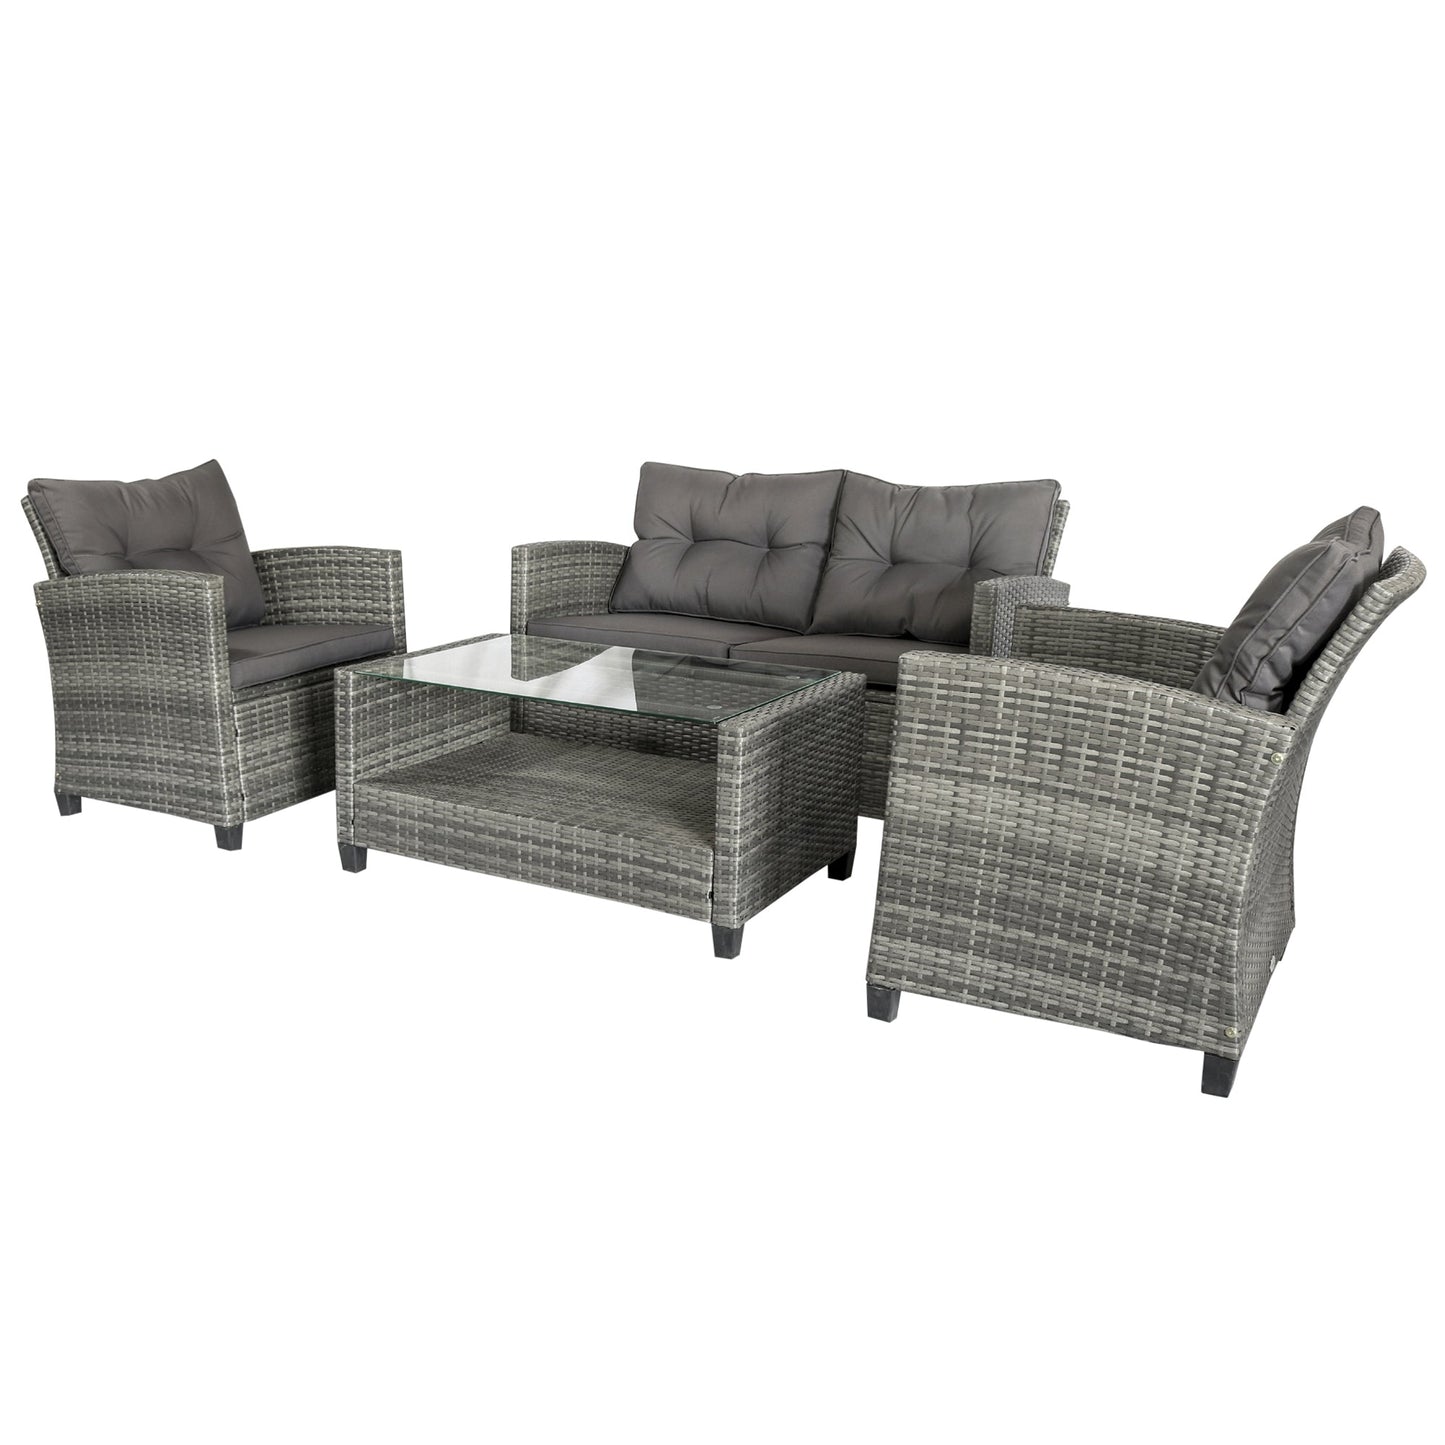 Outdoor and Garden-4-piece Outdoor Patio Rattan Furniture Set with 2 Chairs 1 Double Couch & a Coffee Table & Cushions Grey - Outdoor Style Company